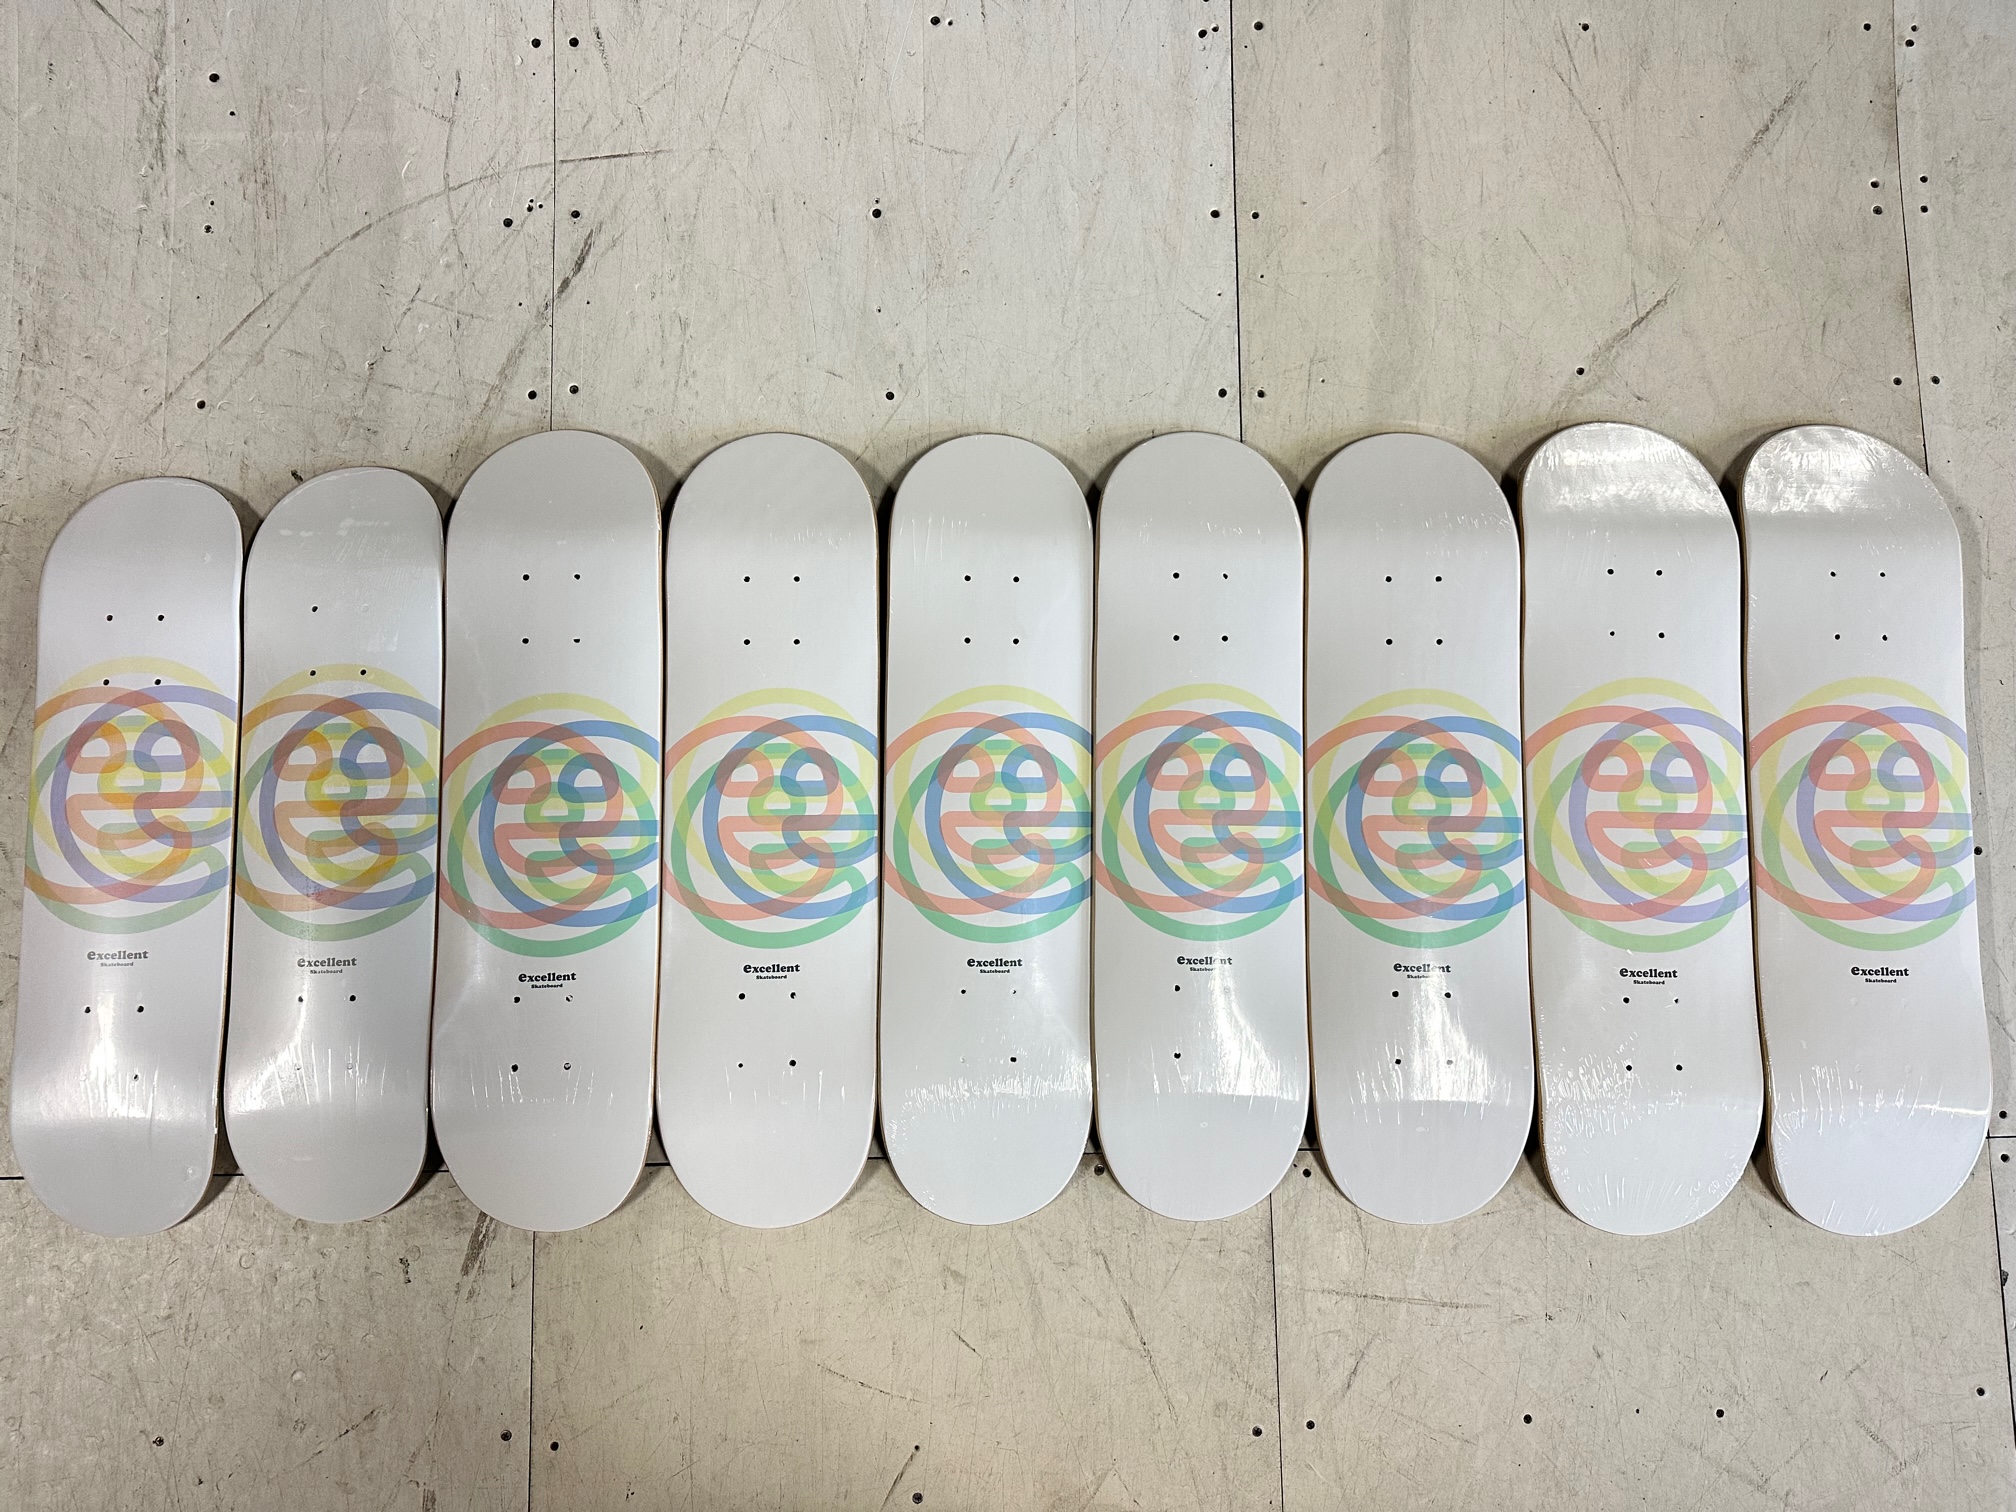 excellent skateboard 入荷しました！！